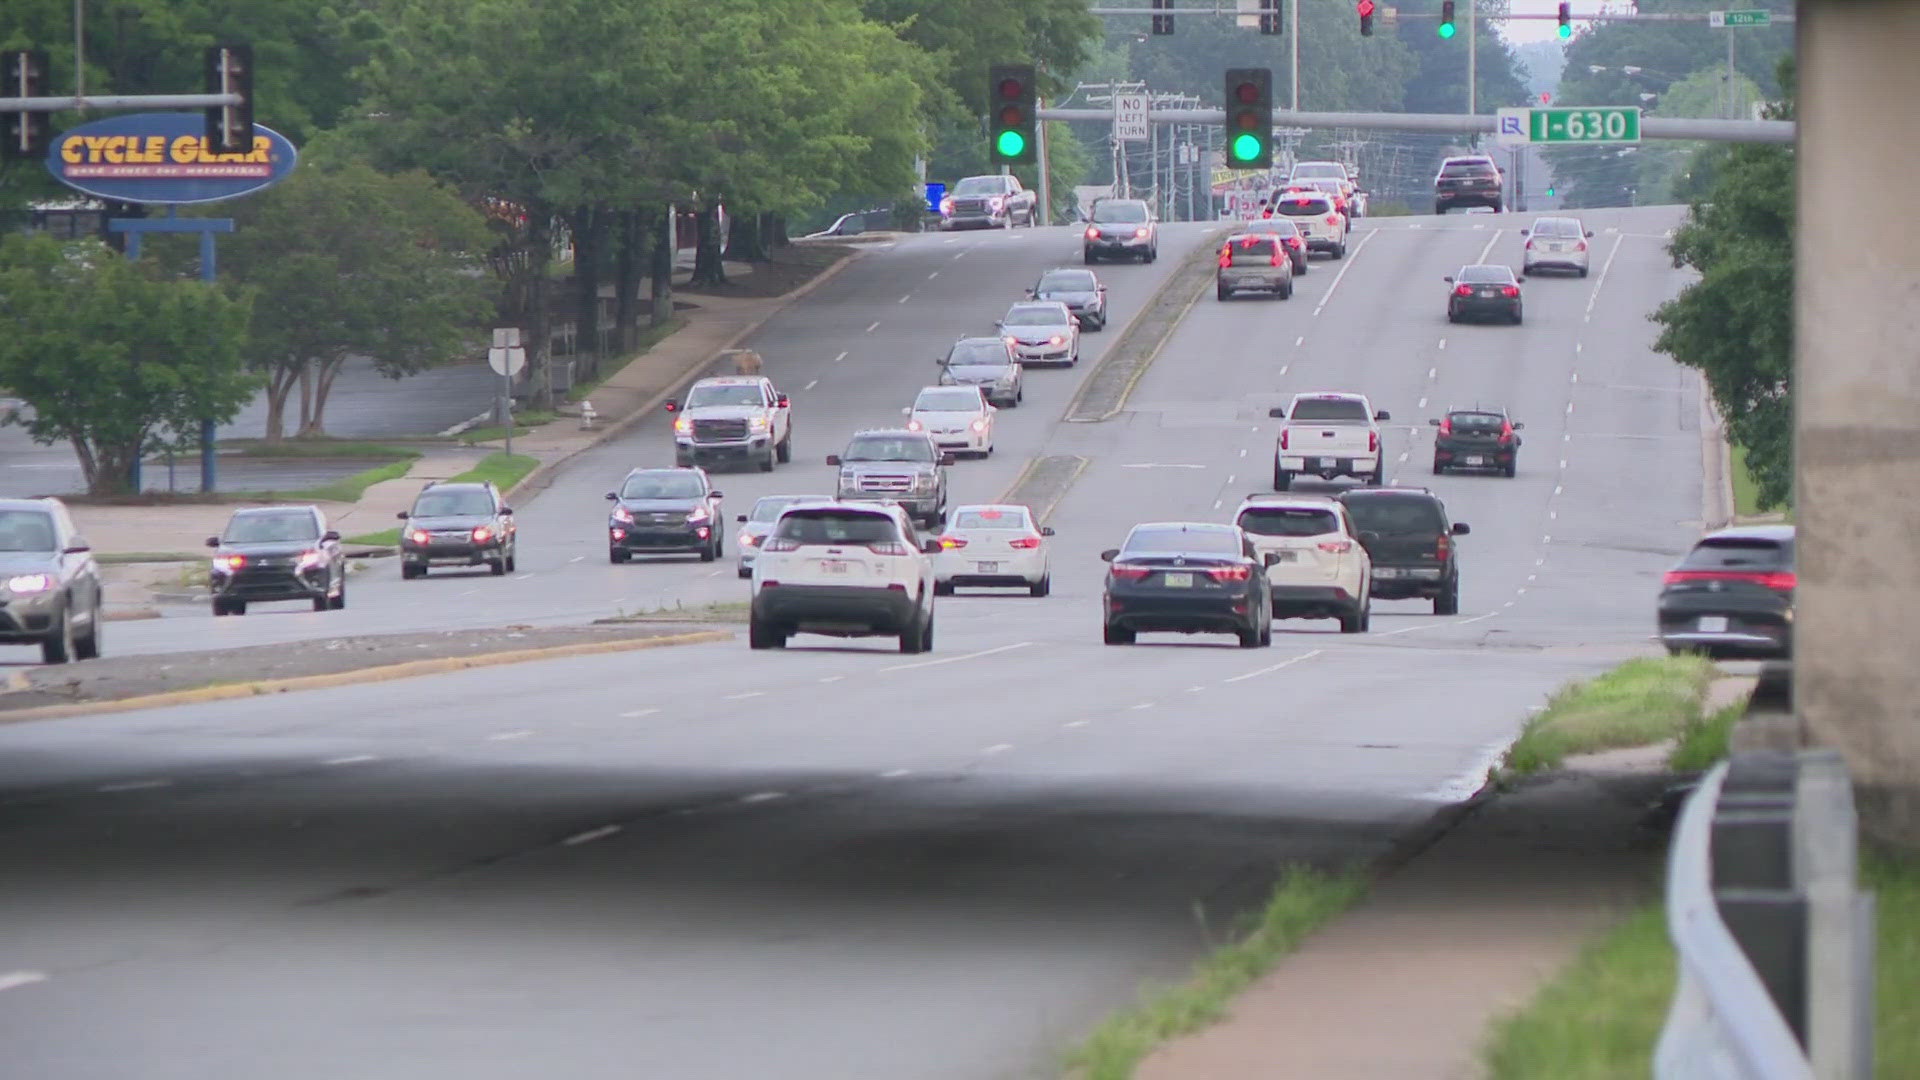 The City of Little Rock is now taking steps to make some of the city's busy roads safer for both drivers and pedestrians.